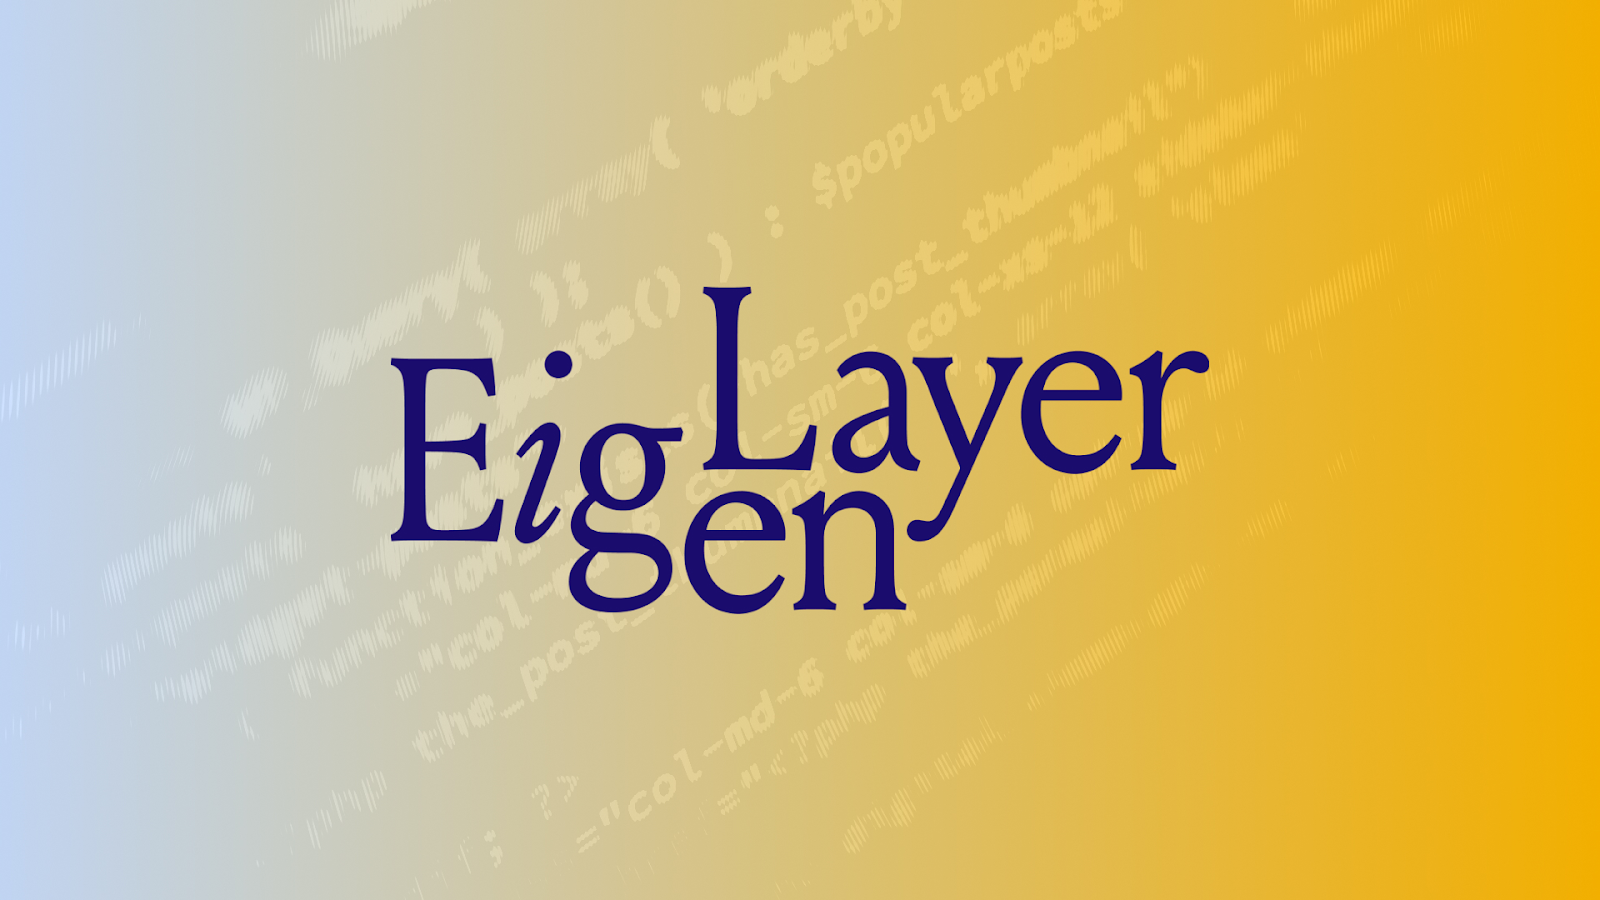 By many accounts, EigenLayer represents a newfound paradigm in the crypto DeFi niche with the development of its restaking protocol, data availability (DA) layer, and other innovations. The founder of EigenLayer, Sreeram Kannan, is a close associate of Babylon chain. Along with the Babylon team, he helped conceptualize the technical architecture of some of the main features of Babylon. (Image Credit: Ethereum Re-Staking Solution EigenLayer Garners Testnet Milestone via CryptoDaily)